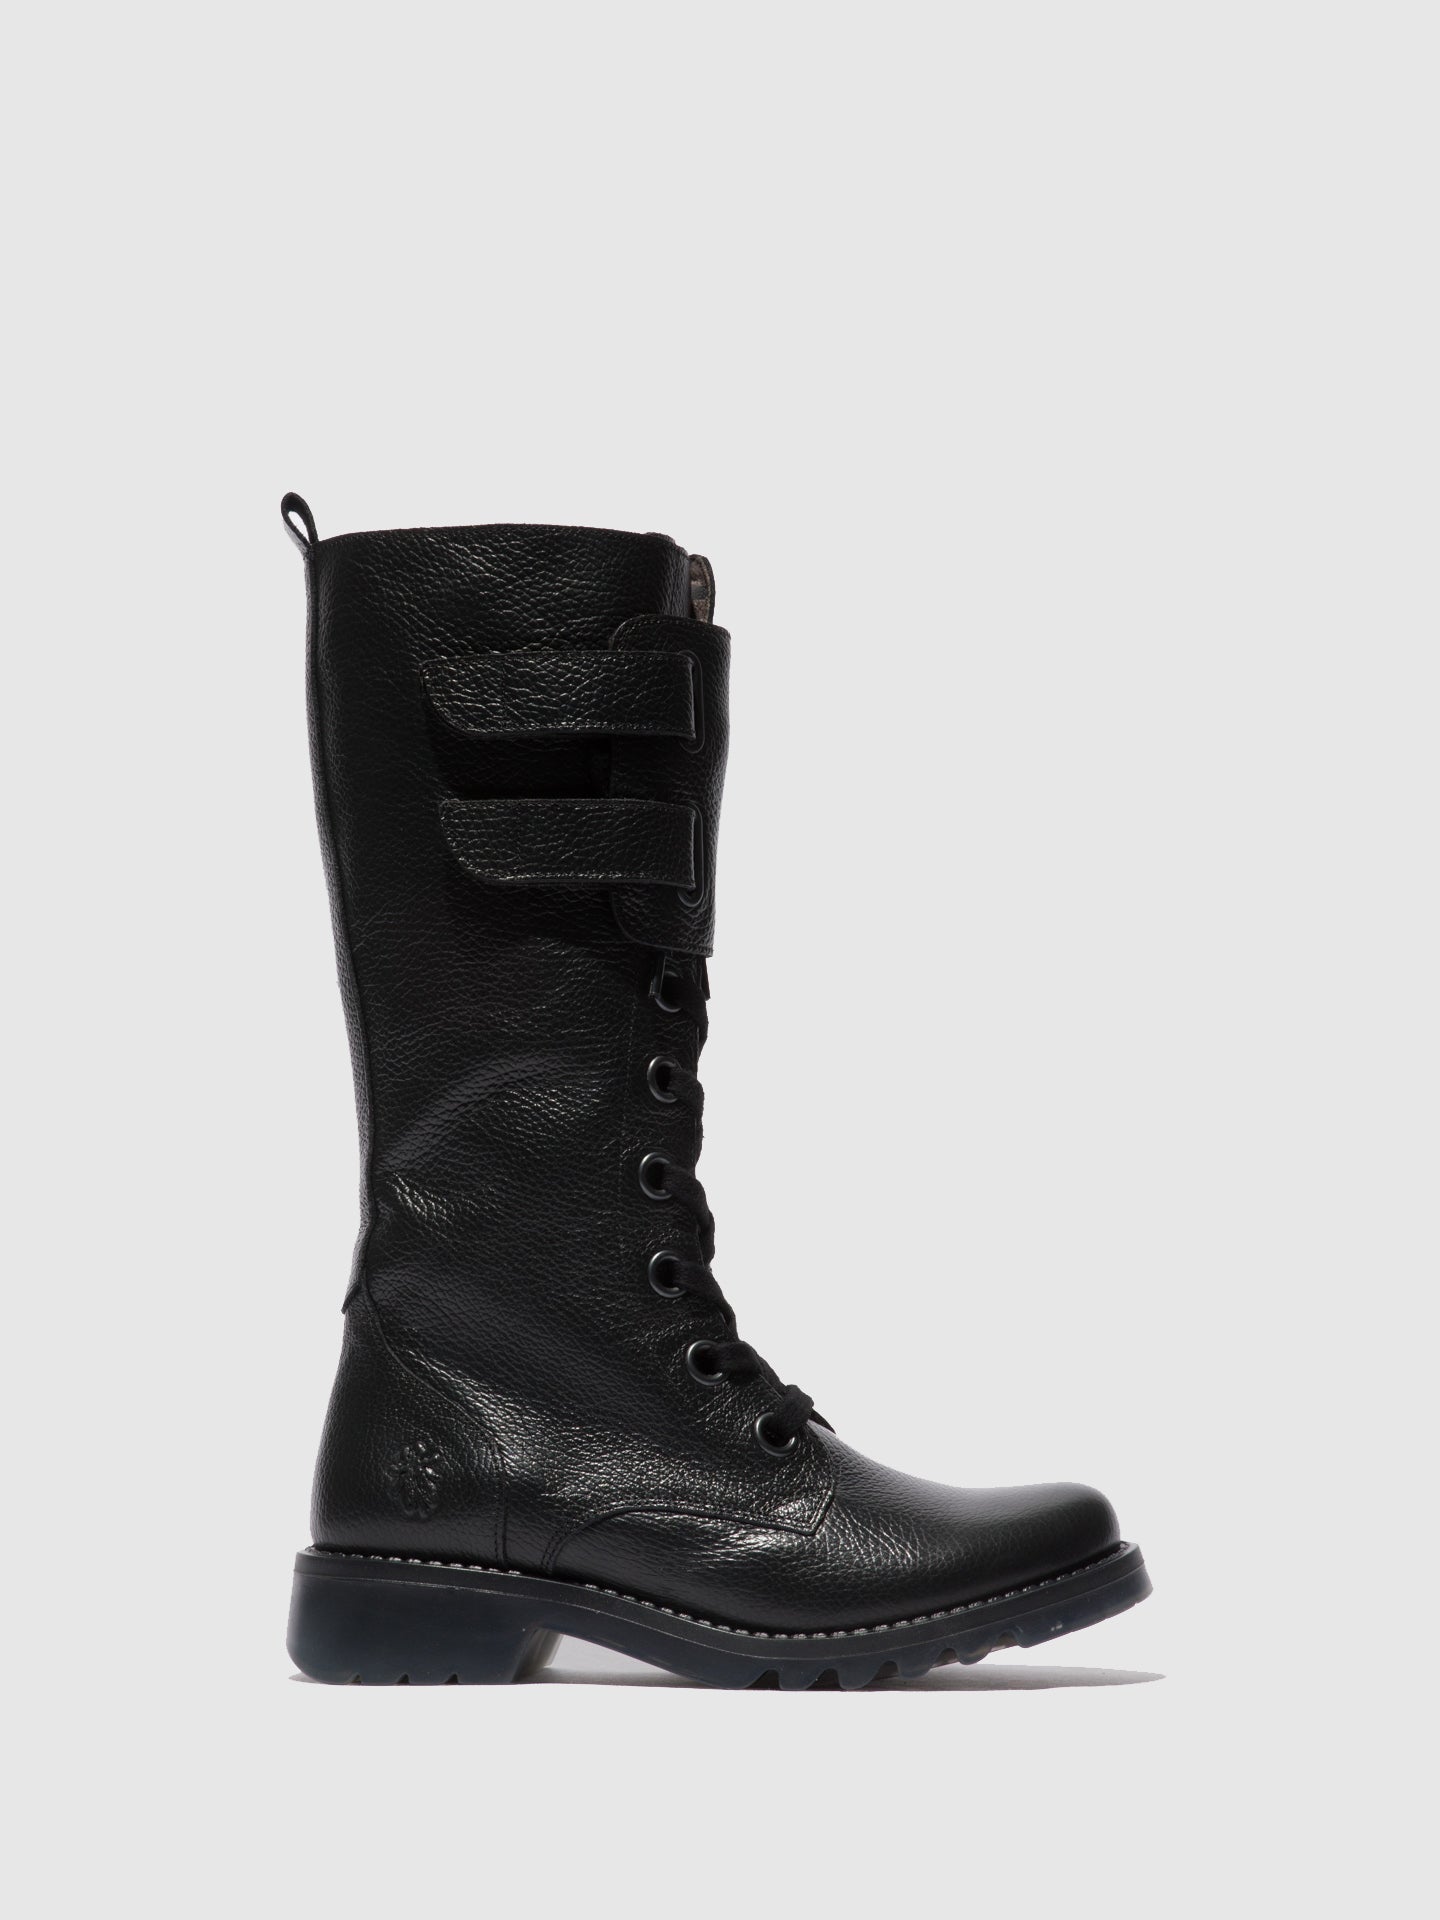 Fly London Lace-up Boots RIGA796FLY RIO BLACK